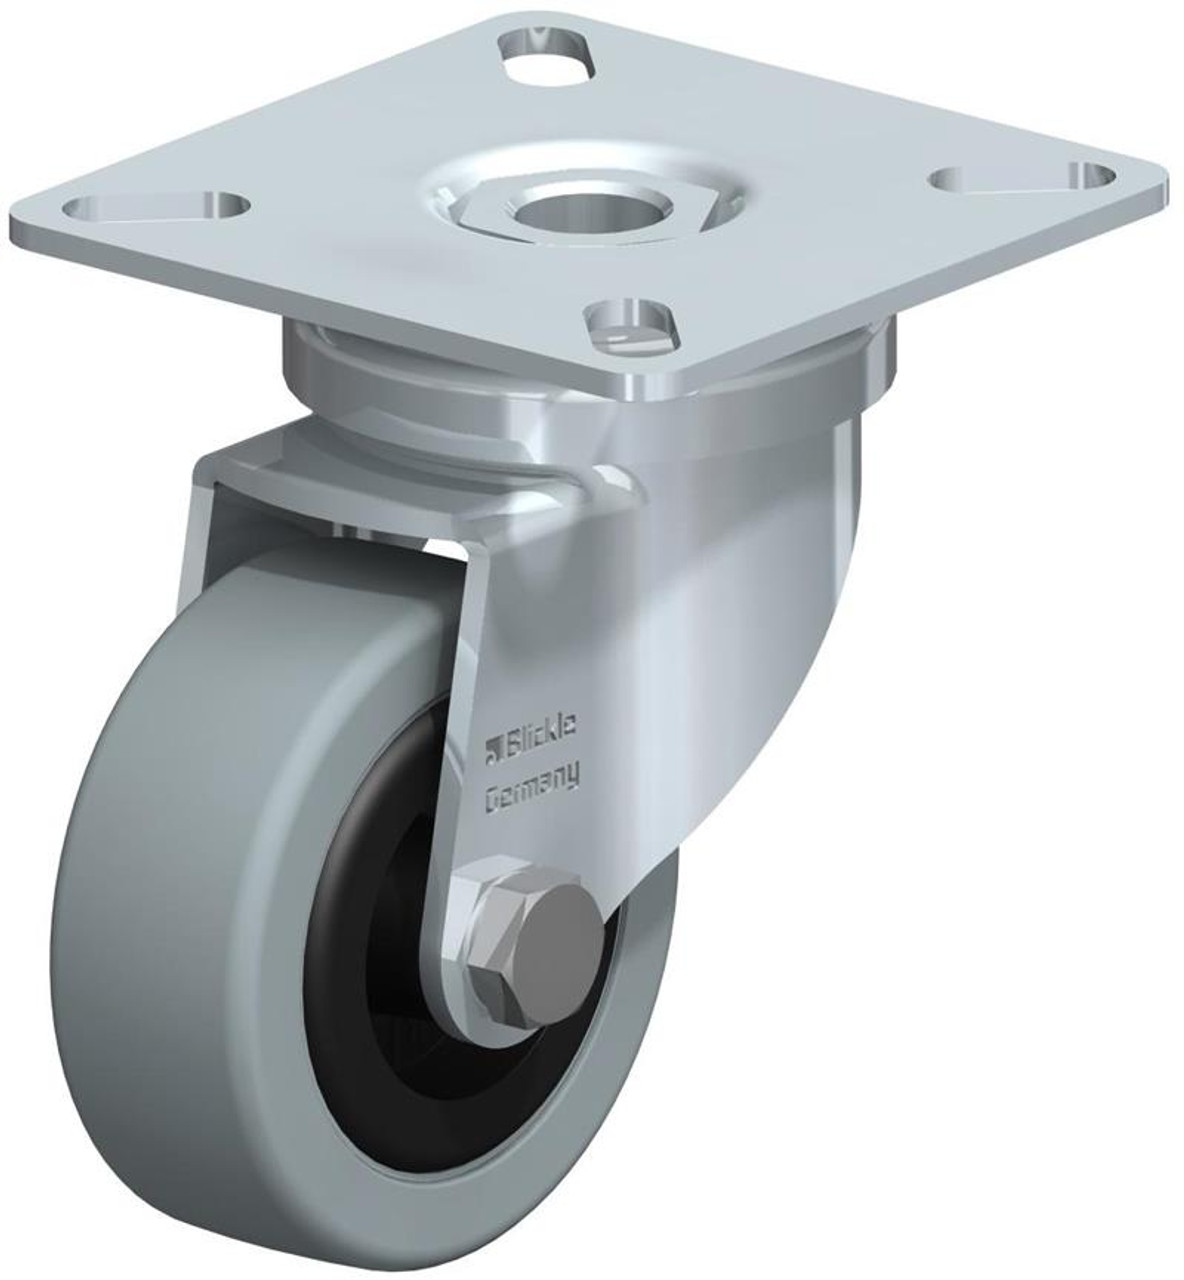 1.45.22050 -AC 50mm swivel caster with top plate